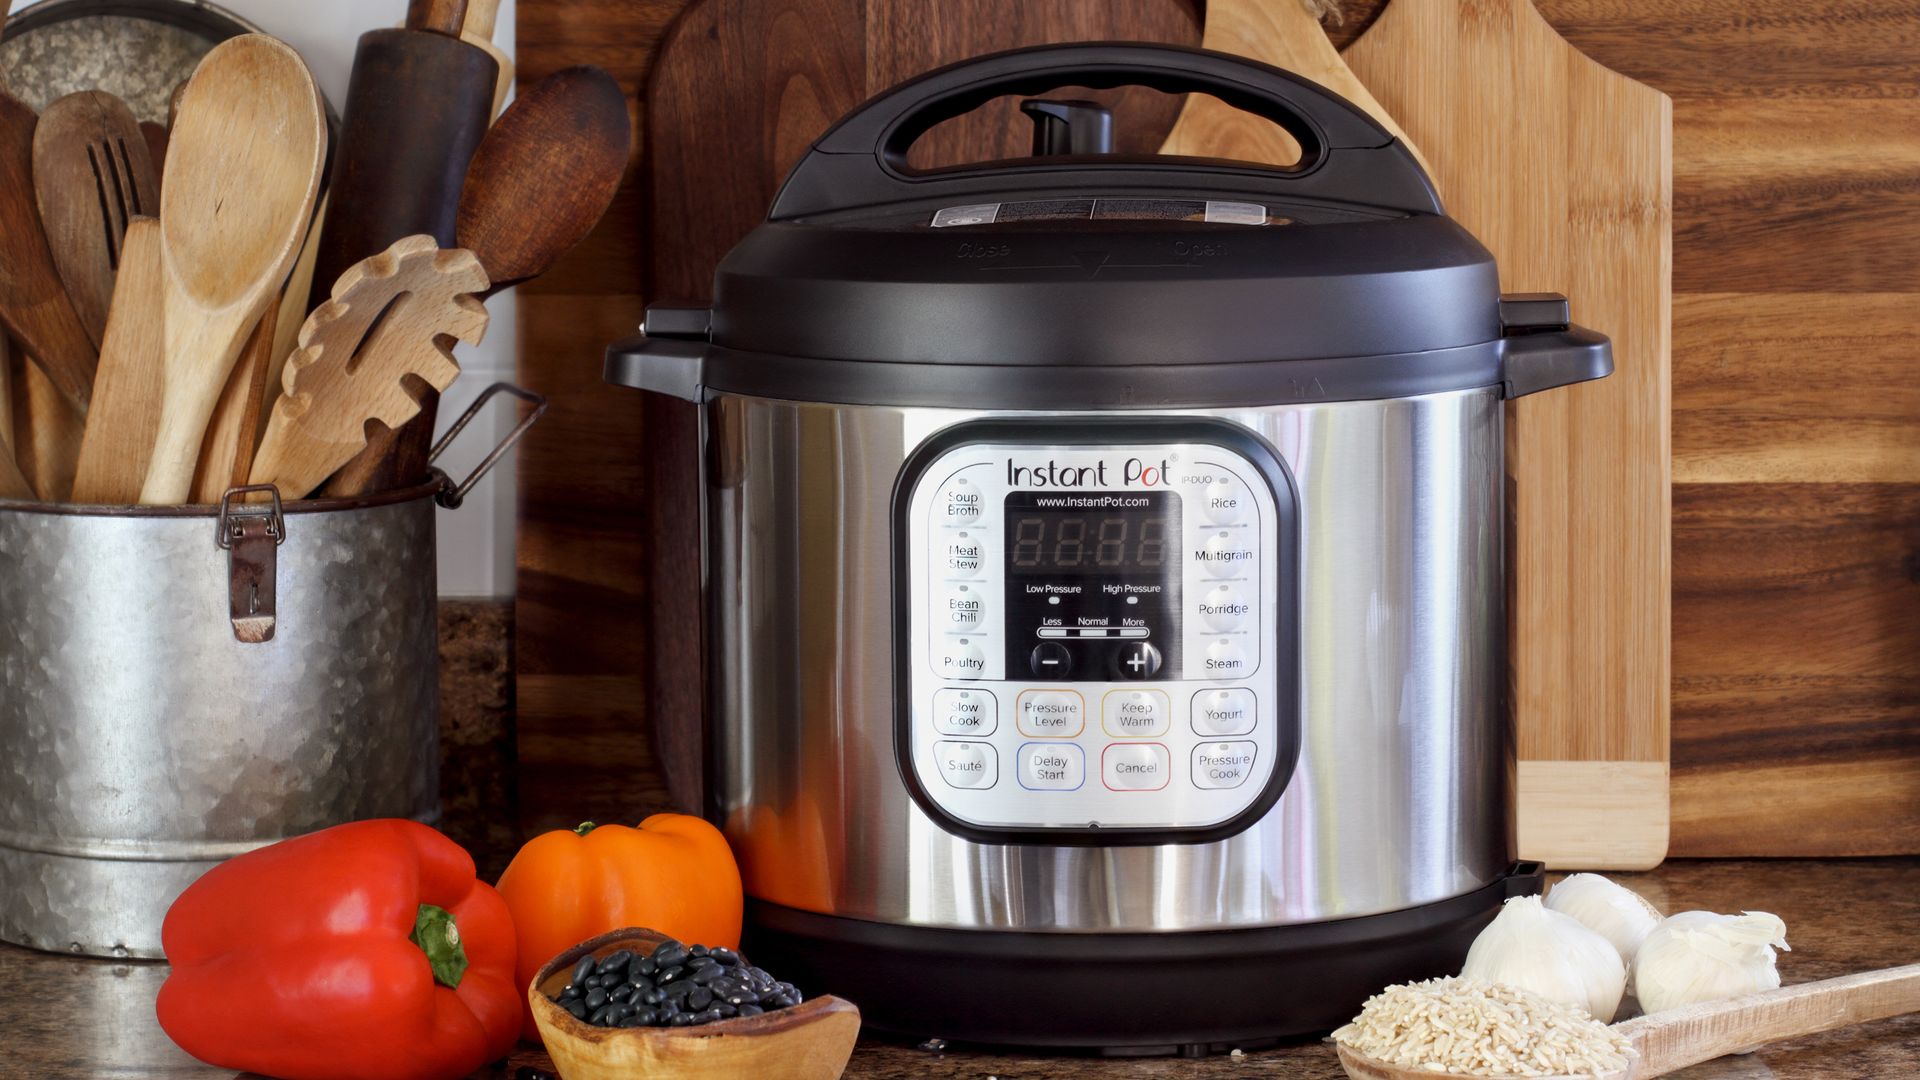 10 things you should never cook in an Instant Pot | Tom's Guide